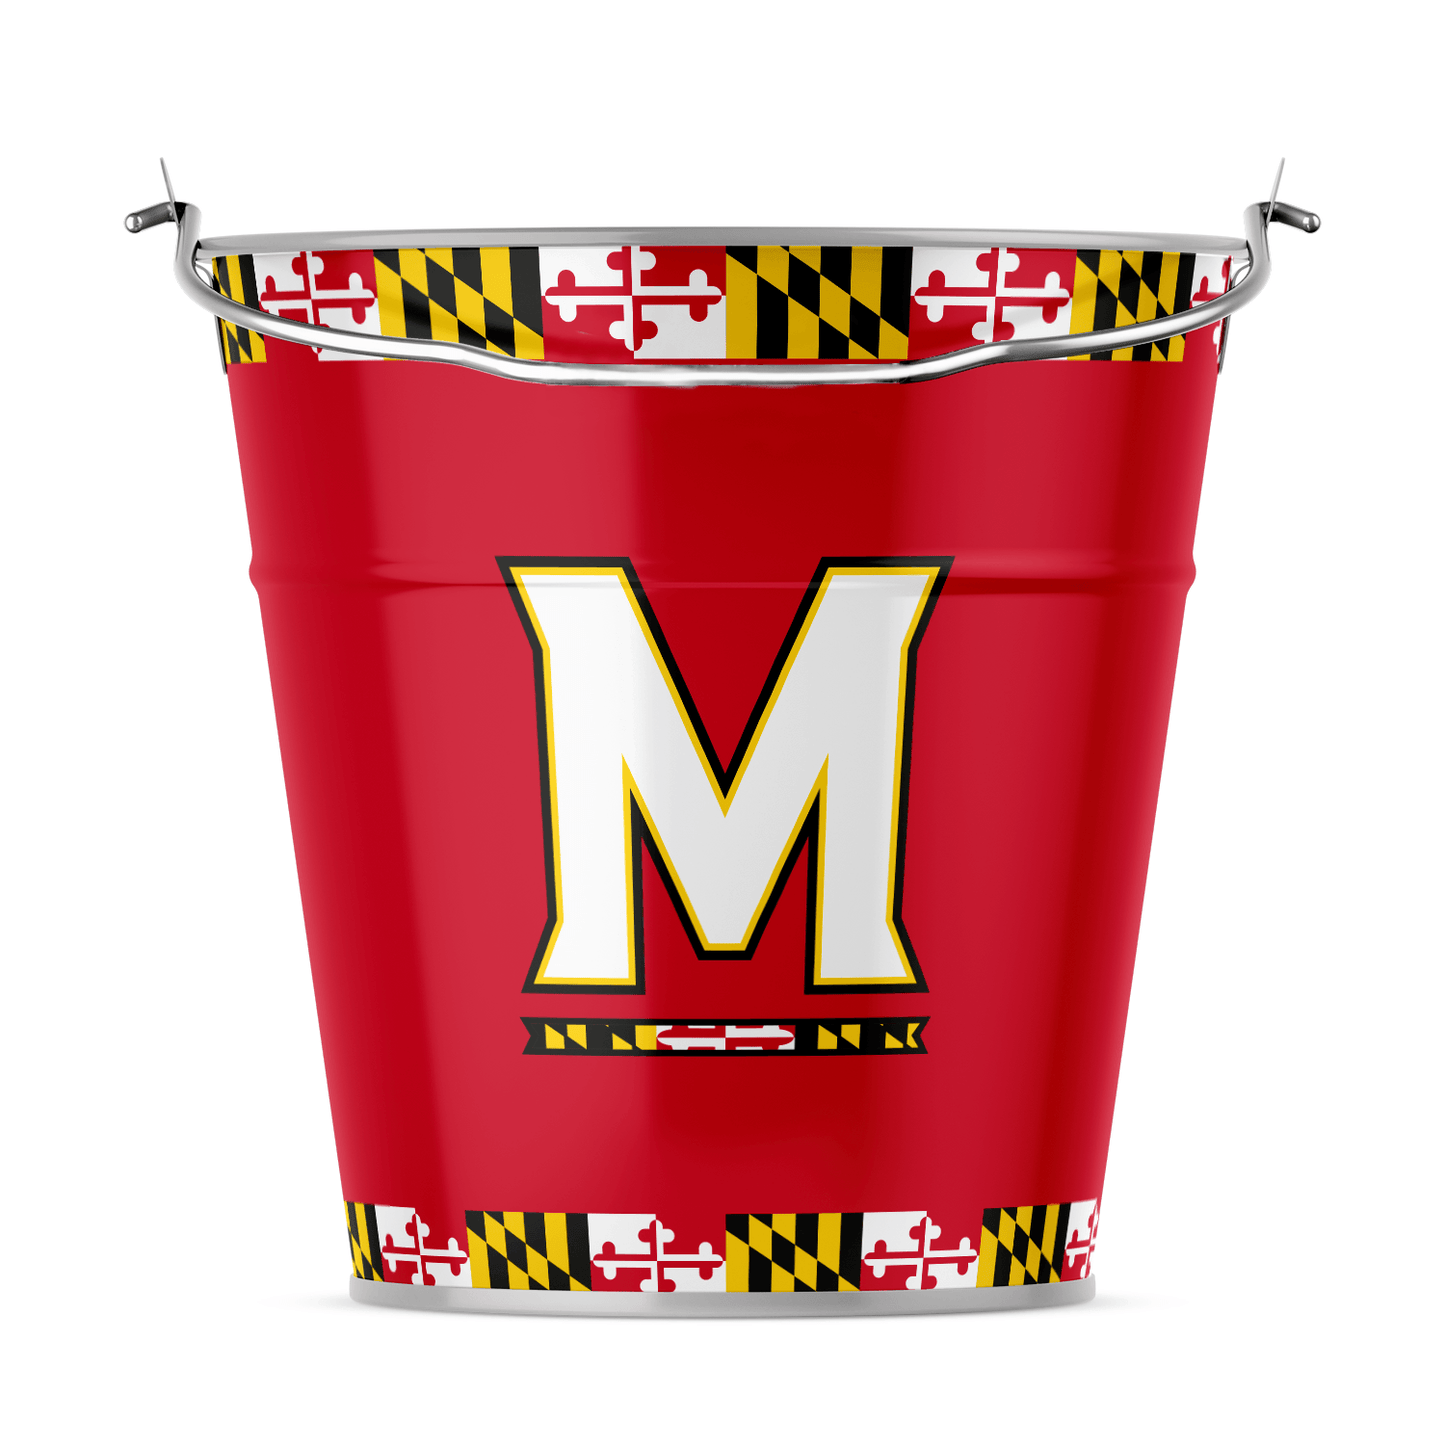 *PRE-ORDER* UMD "M" Logo with Maryland Flag Wrap (Red) / Metal Bucket (Estimated Ship Date: 5/25) - Route One Apparel